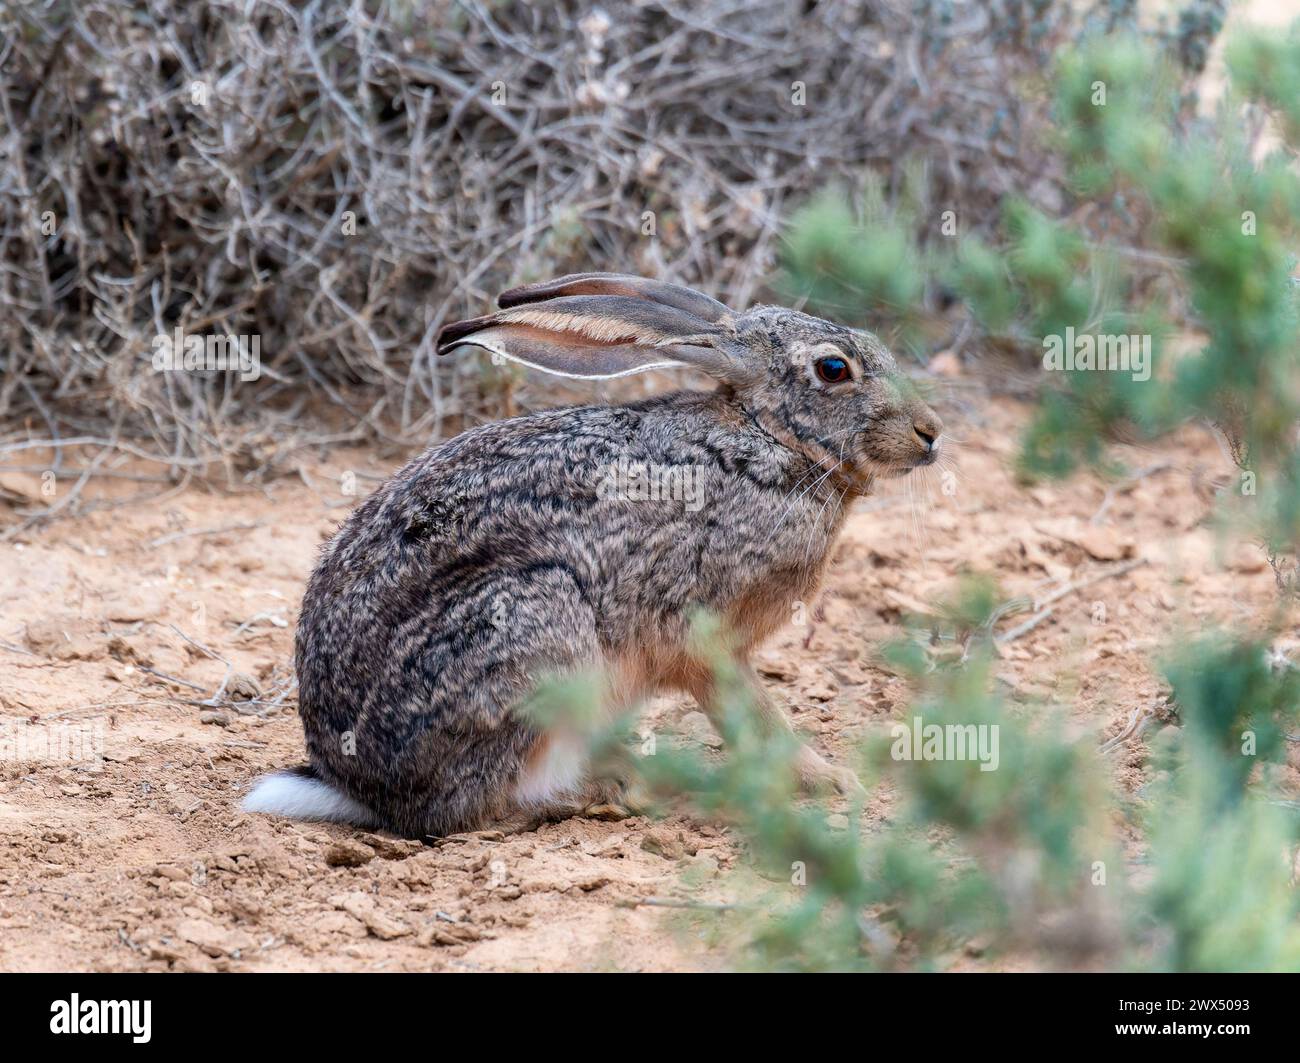 A Cape Hare Lepus capensis sitting in the dirt next to a bush in South Africa, displaying typical behavior in its natural habitat. Stock Photo